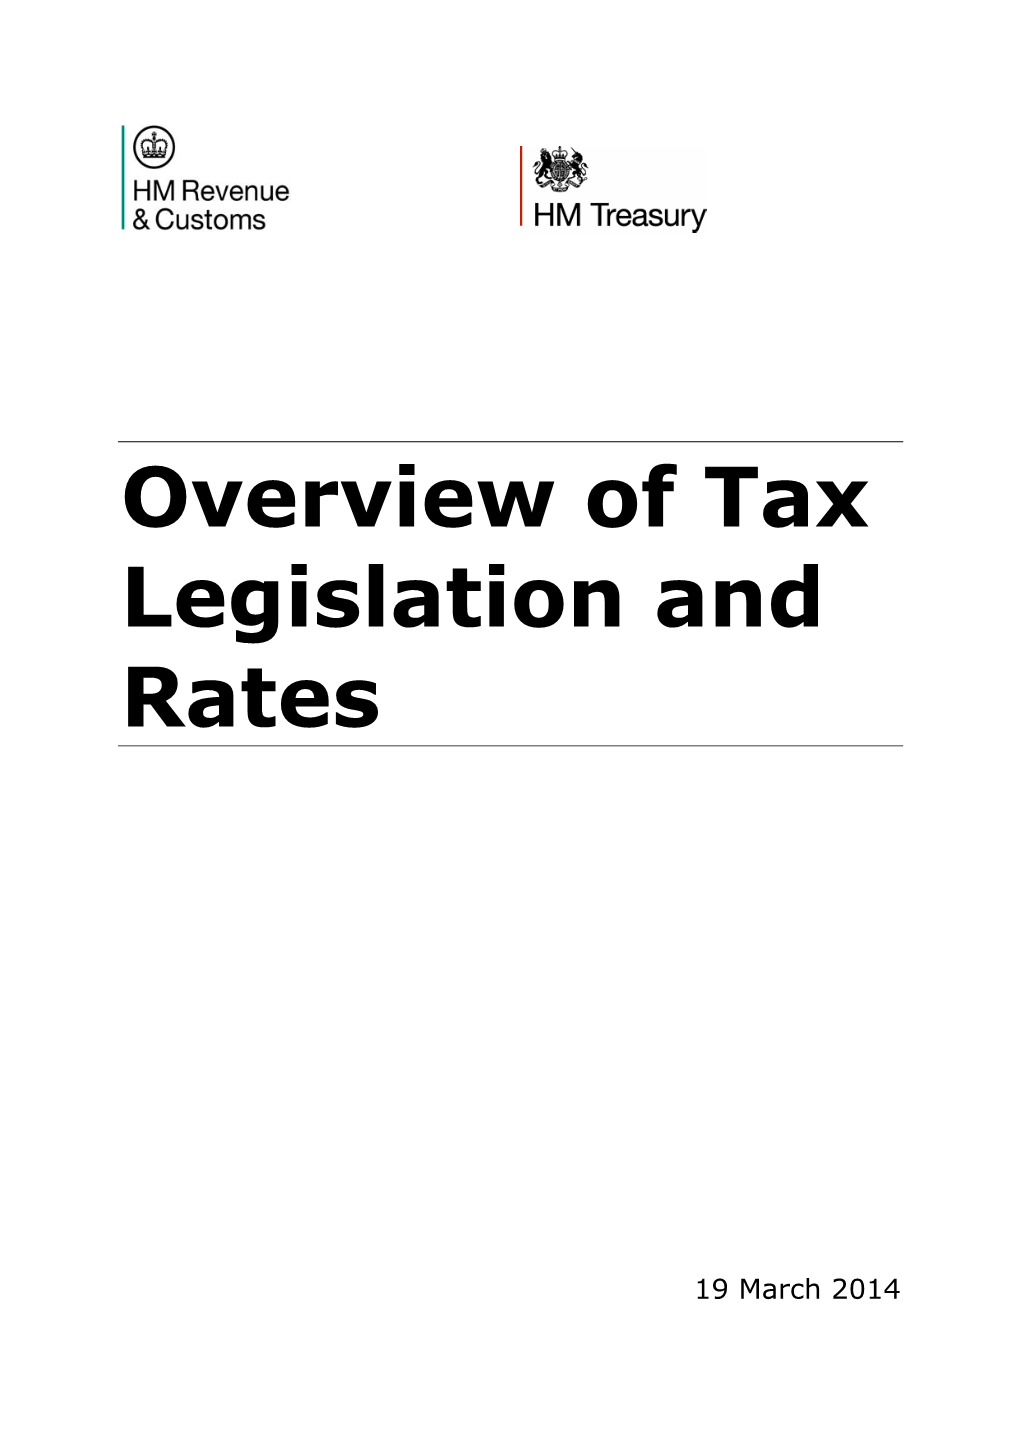 Overview of Tax Legislation and Rates 2014